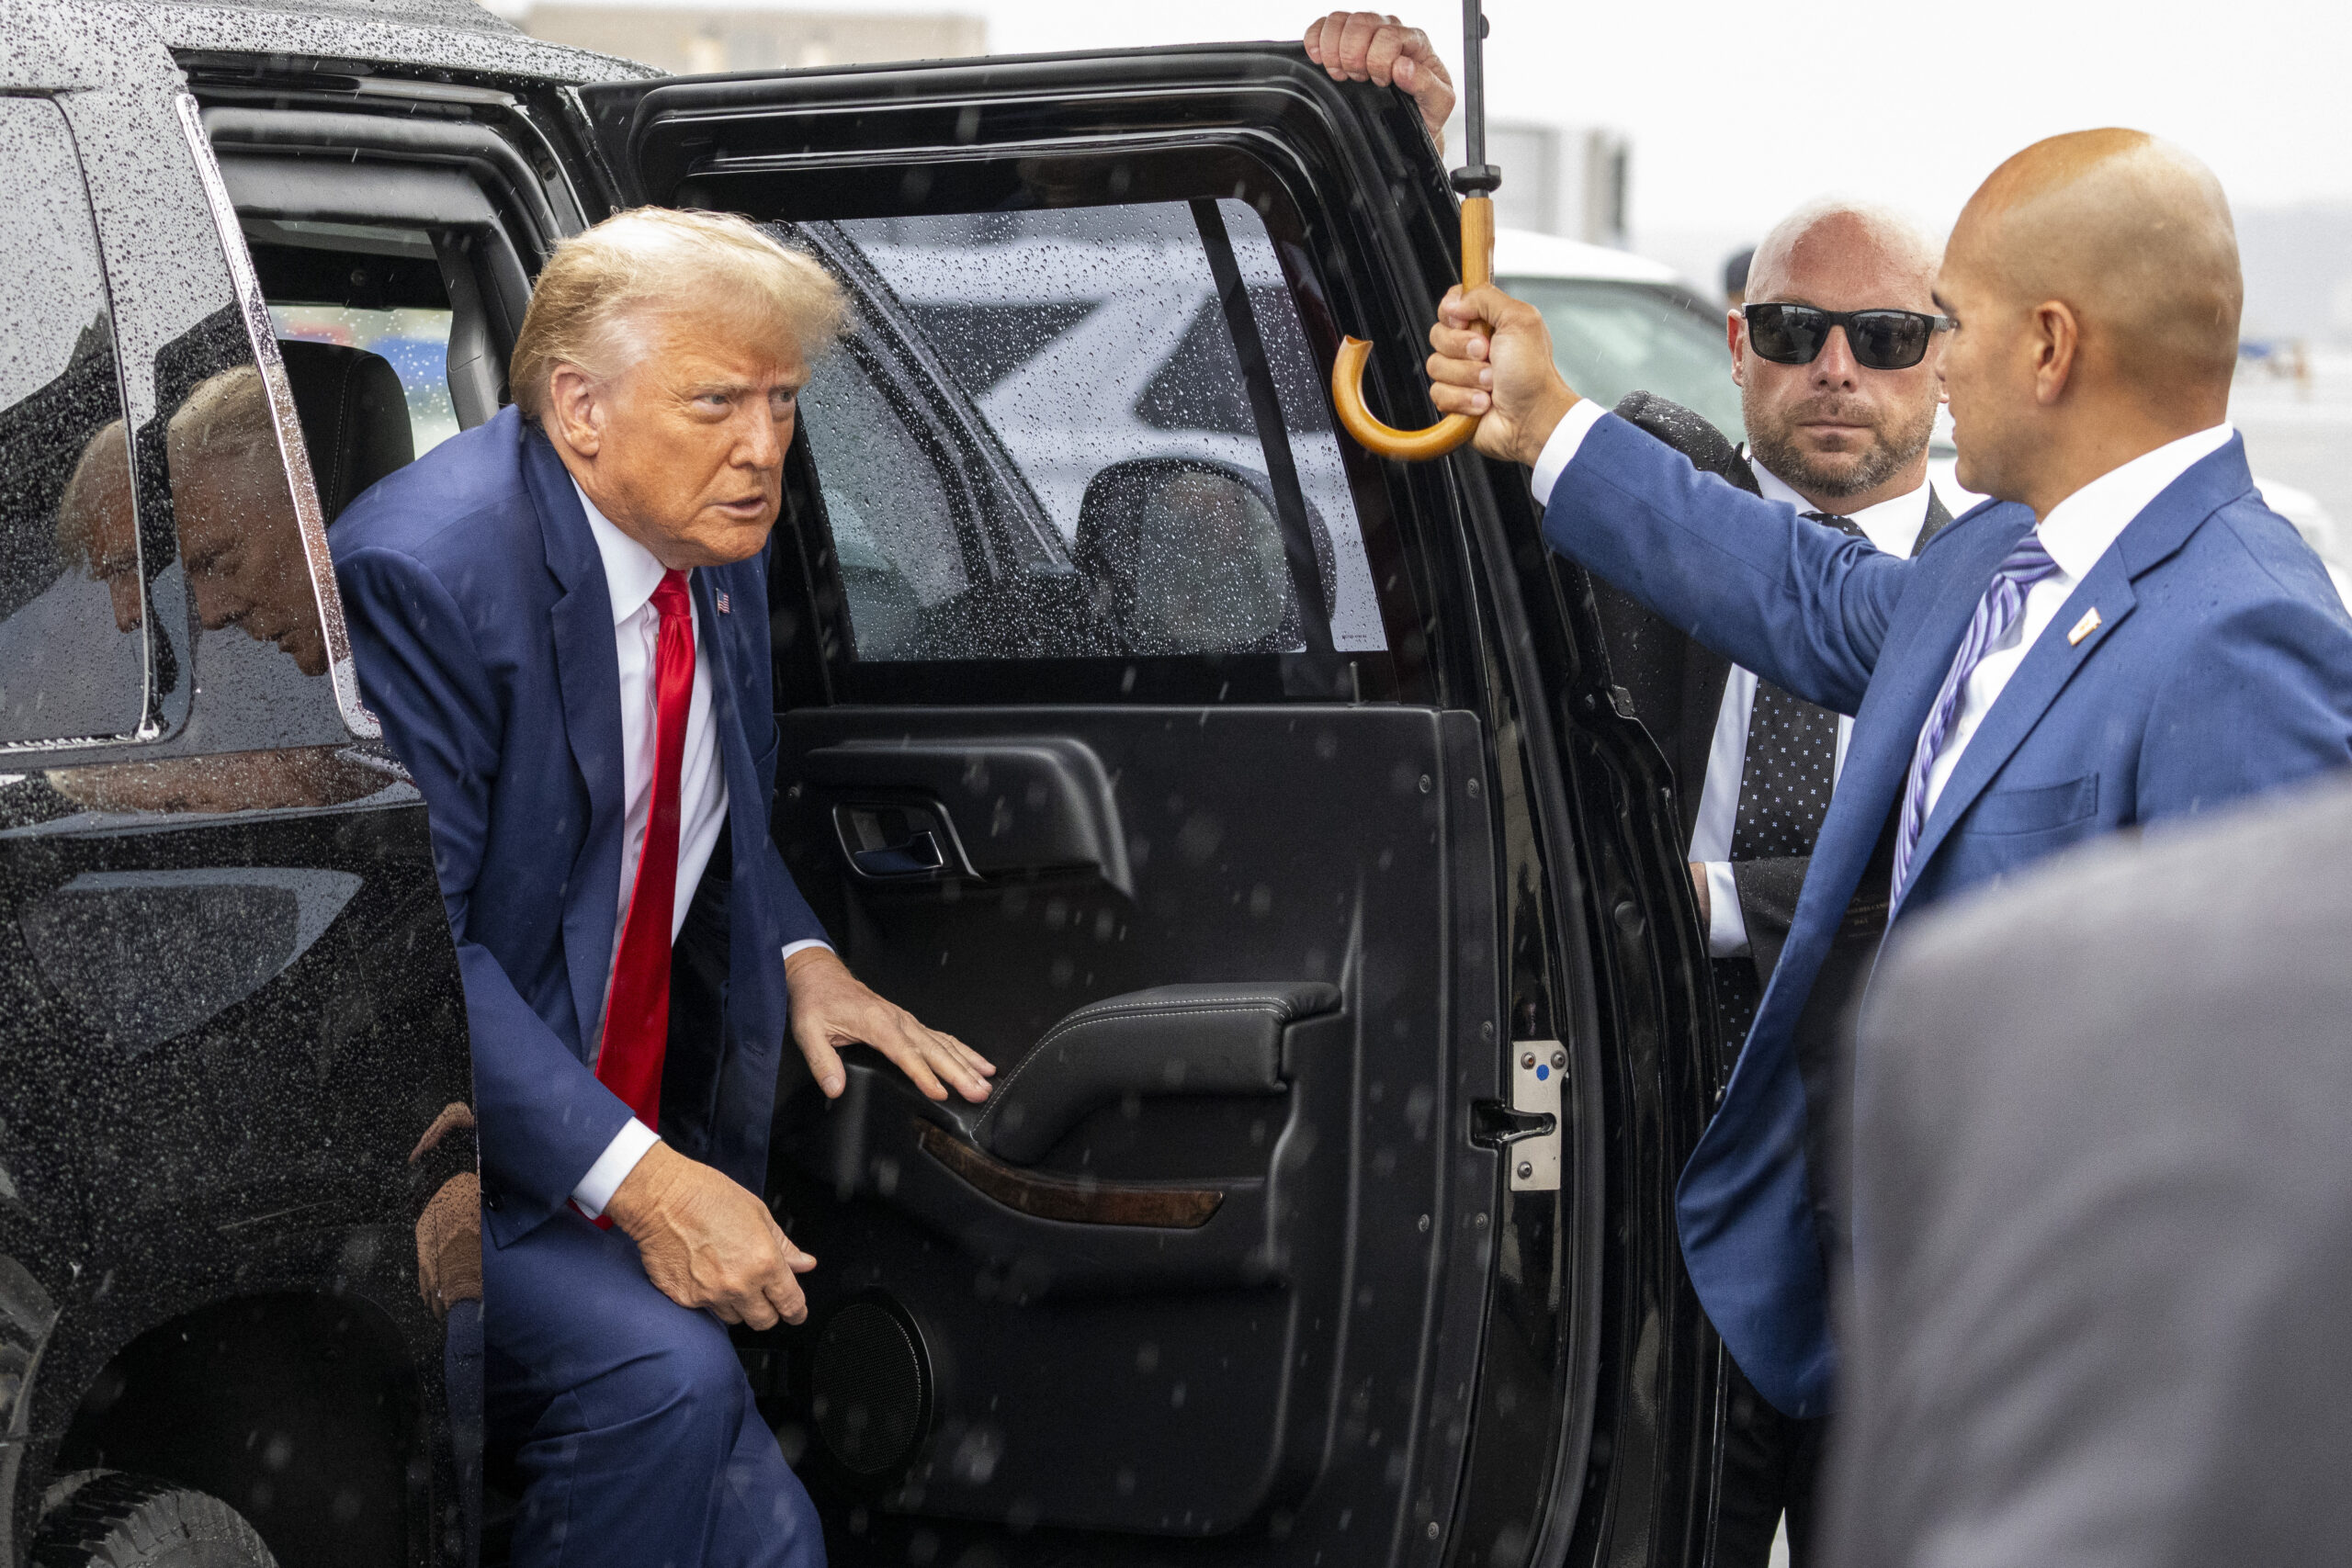 Trump Declares He Had a ‘Very Good Day’ Despite Being Arrested and Flying to ‘Filthy’ D.C.